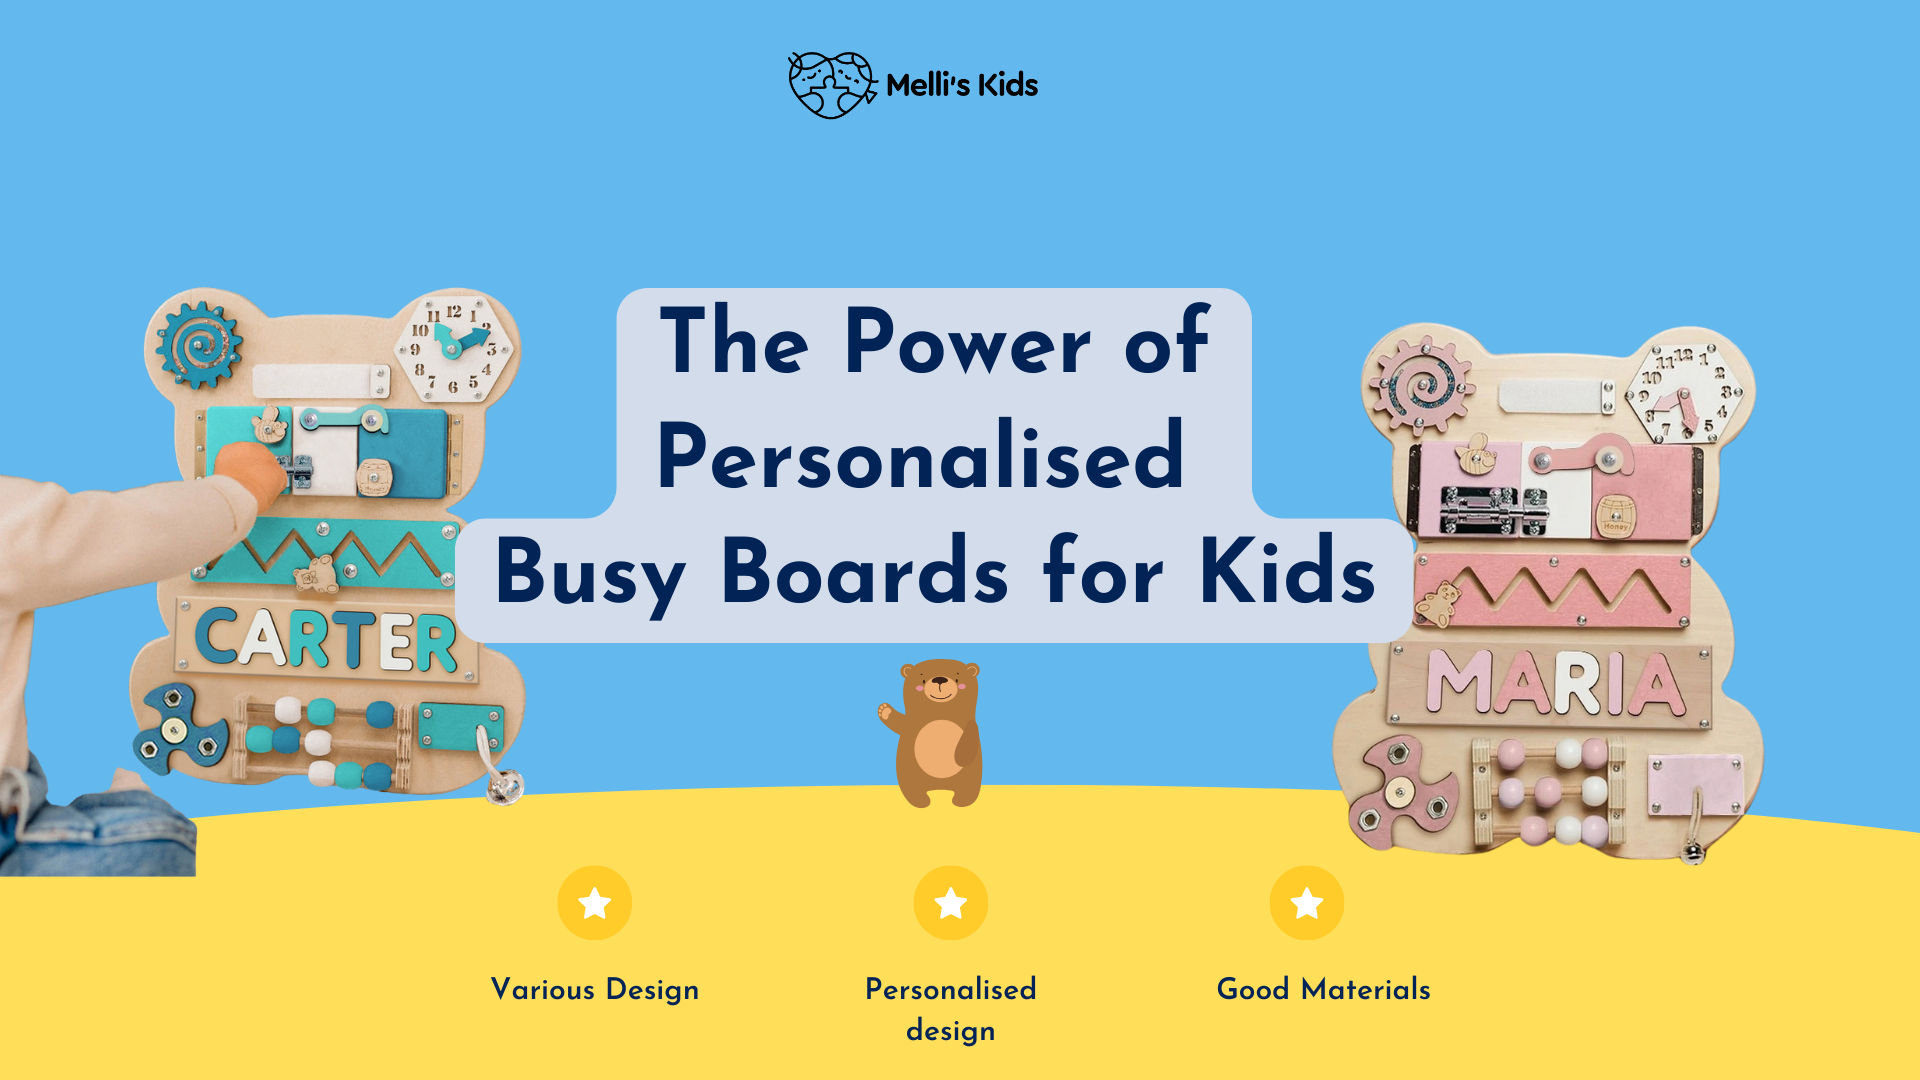 Beyond Ordinary: The Power of Personalised Wooden Busy Boards for Kids